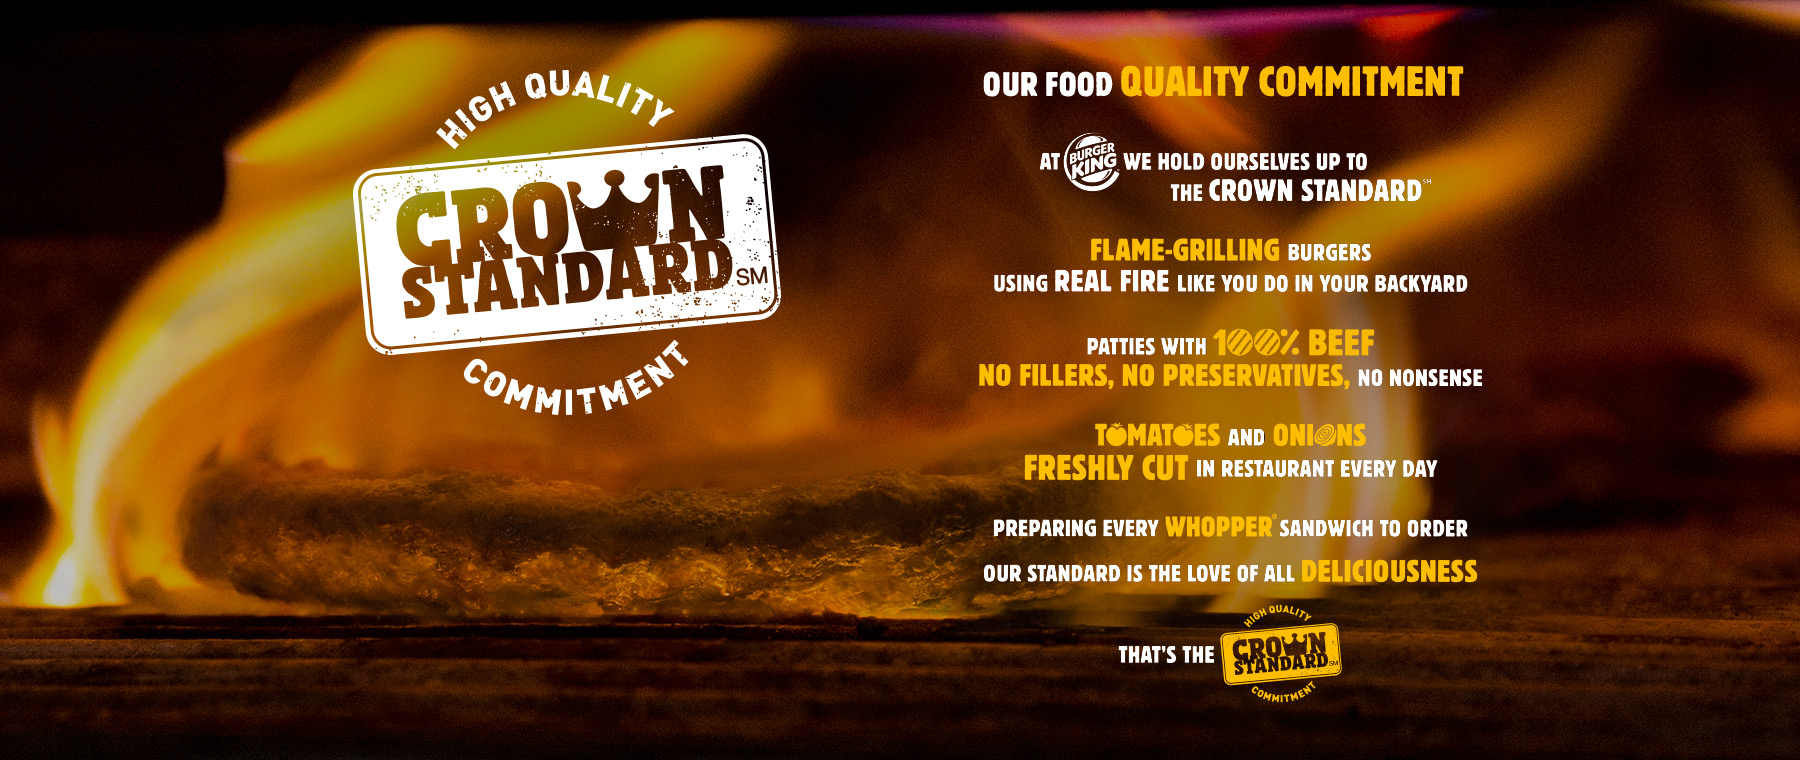 OUR FOOD QUALITY COMMITMENT. At BURGERKING we hold ourselves up to the crown standard. Flame-Grilling Burgers, using REAL FIRE like you do in your backyard. patties with 100% beef no fillers, no preservatives, no nonsense. tomatoes and onions freshly cut in restaurant every day. preparing every whopper sandwich to order our standard is the love of all deliciousness. That is the High quality Crown Standard Commitment.